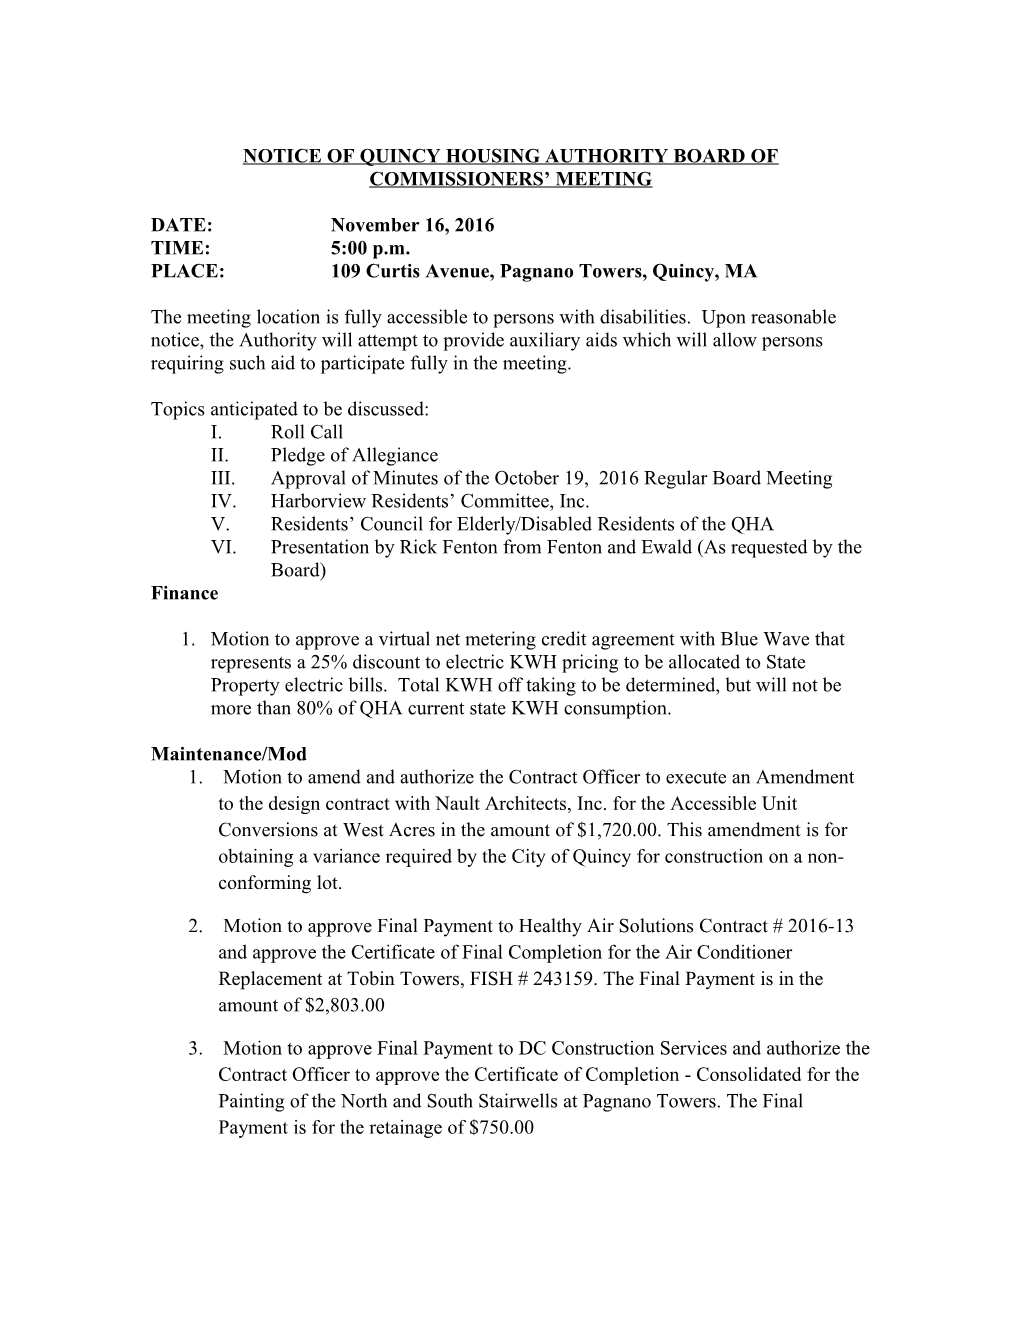 Notice of Quincy Housing Authority Board Of